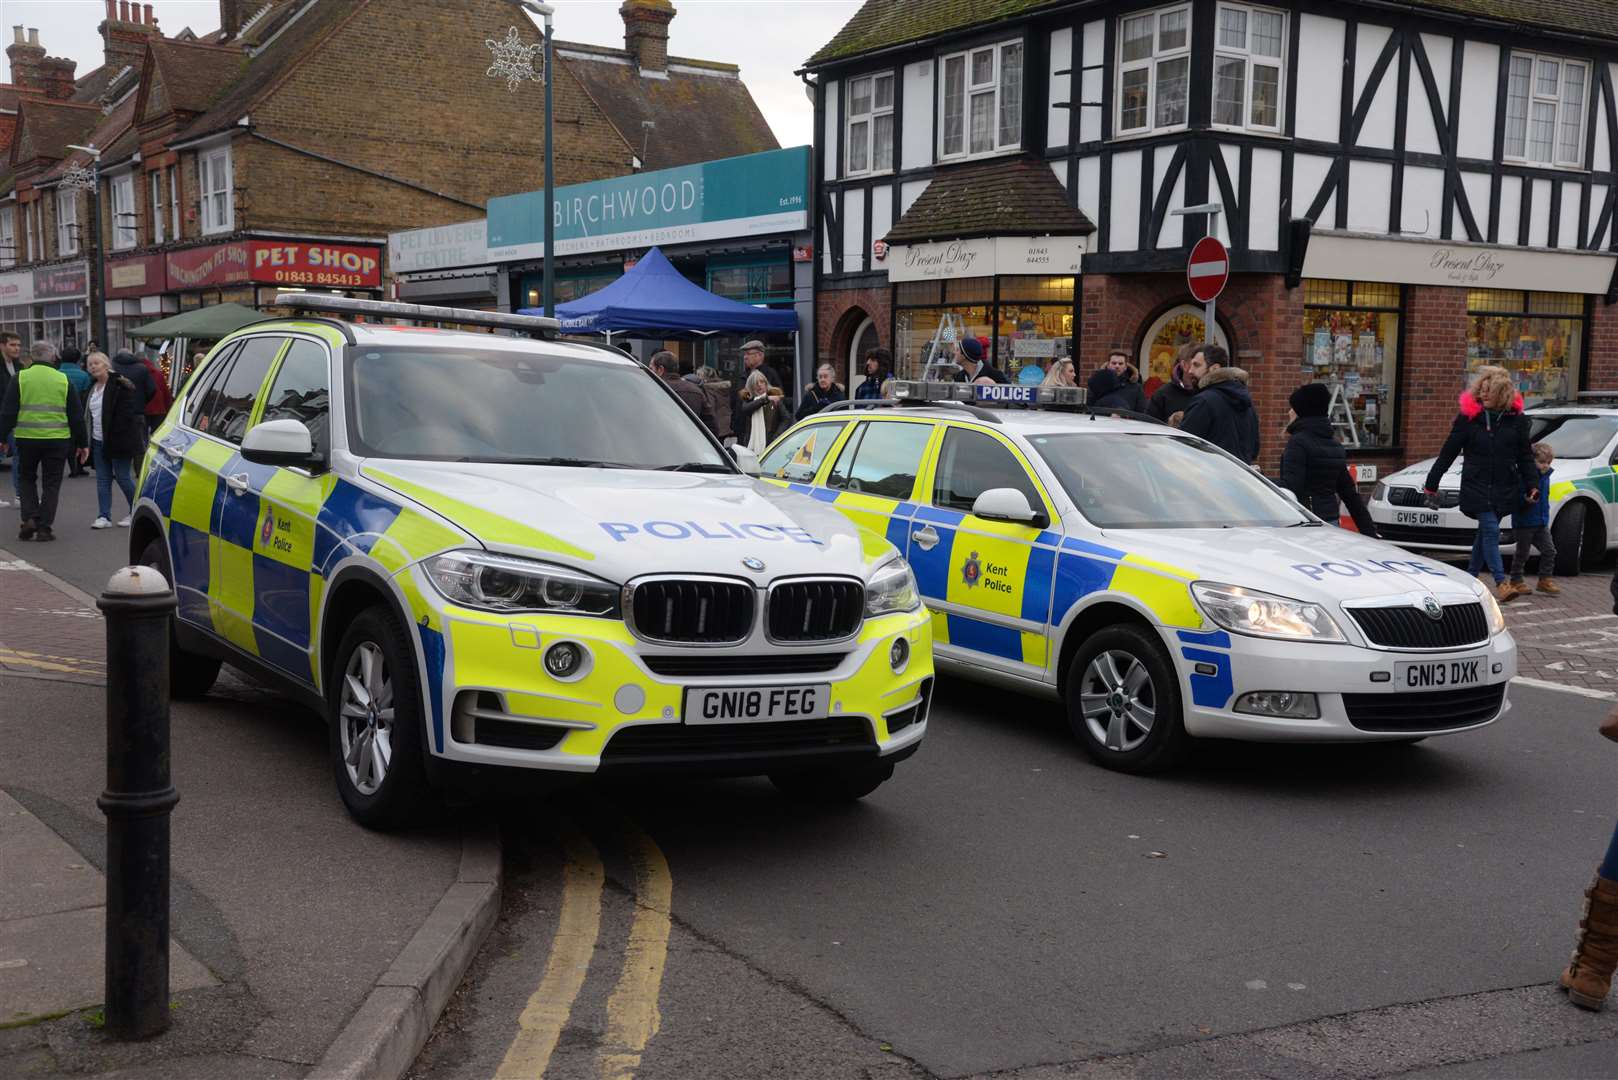 Police vehicles in Station Road close to the Christmas market and family fun day